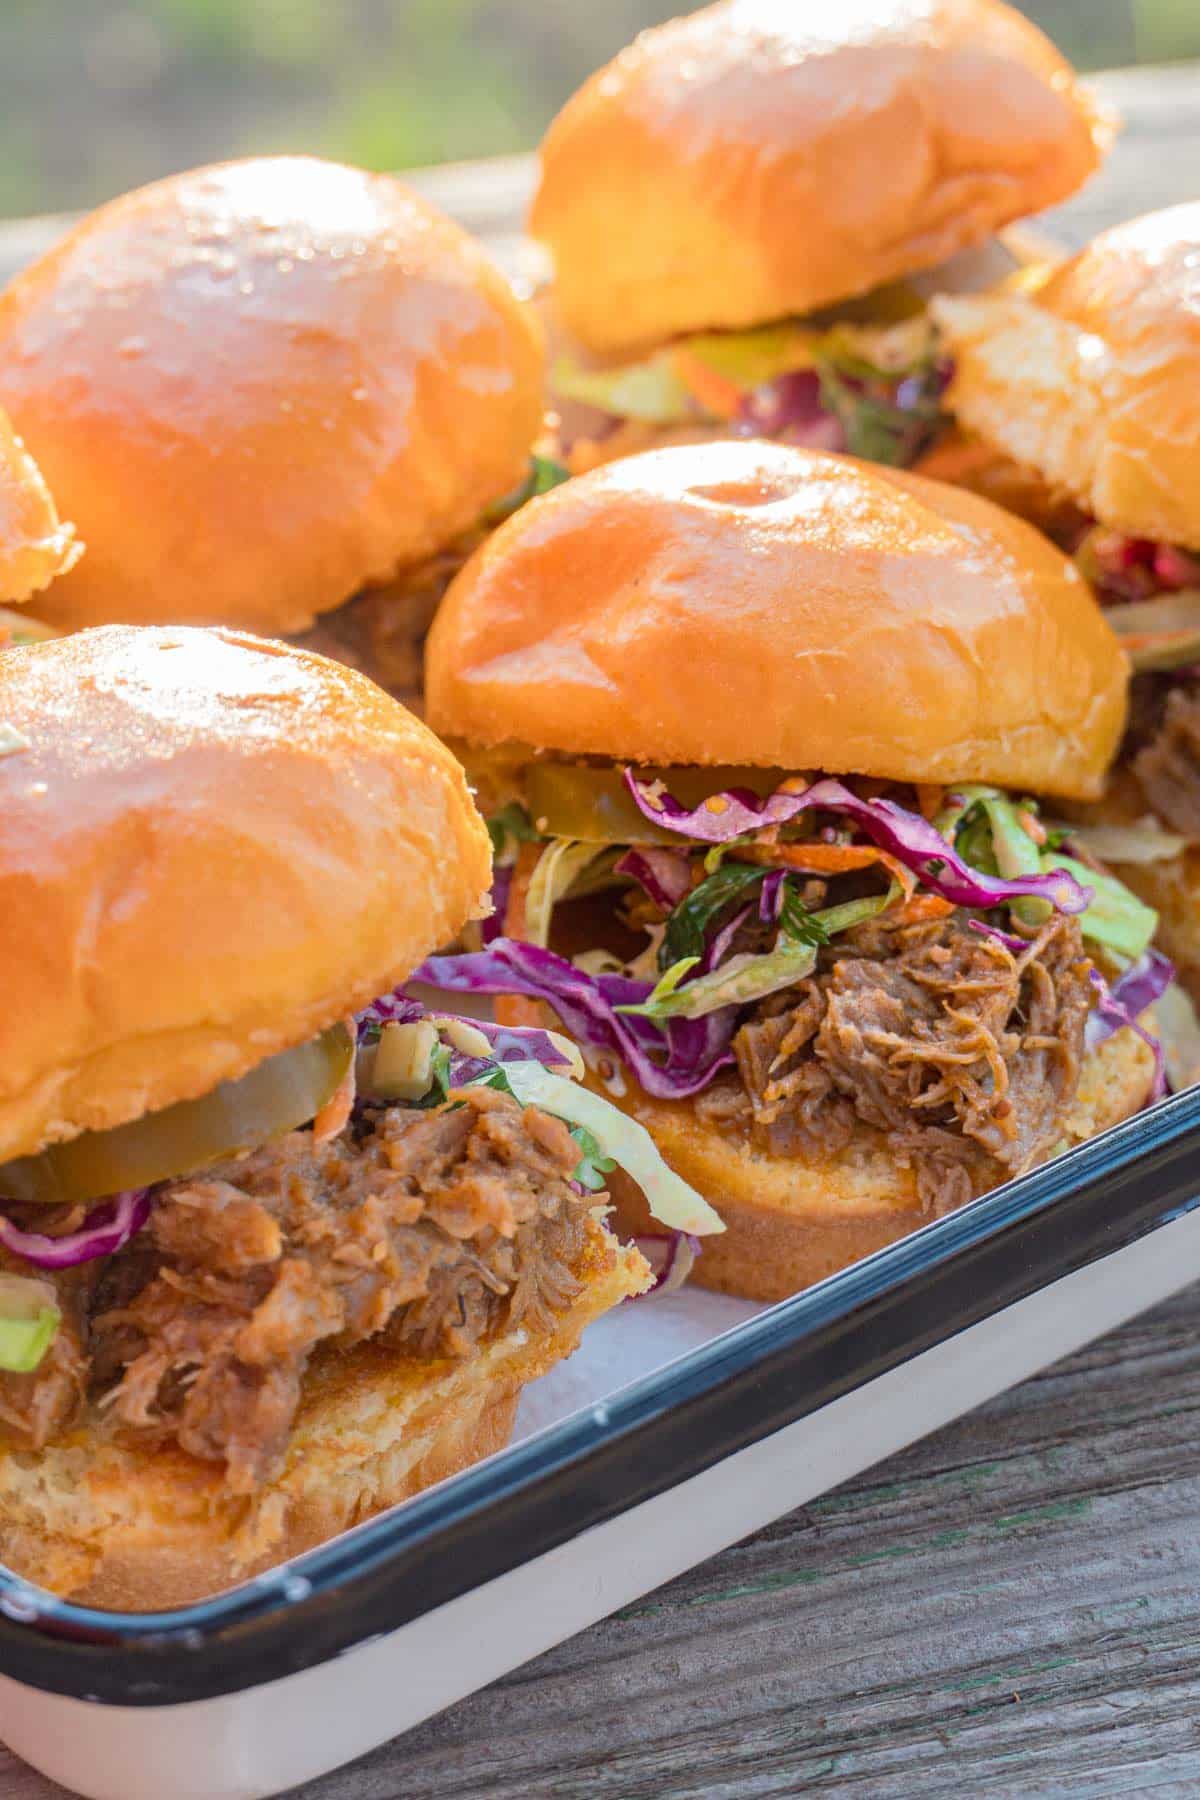 Pulled pork sliders arranged in a white dish.